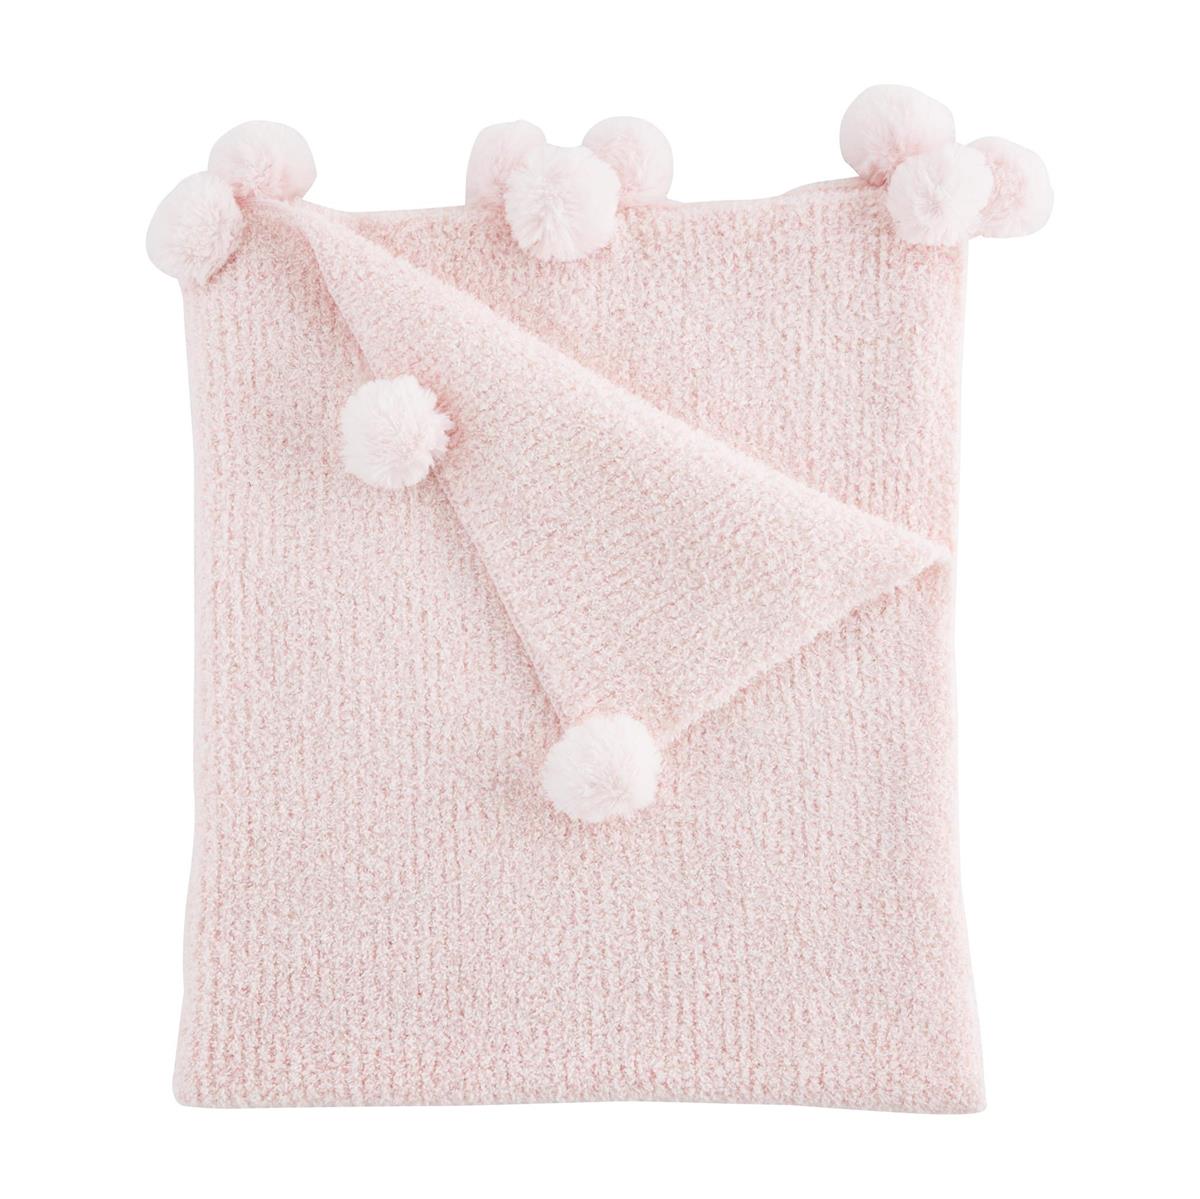 folded pink chenille blanket with pom poms on a white background